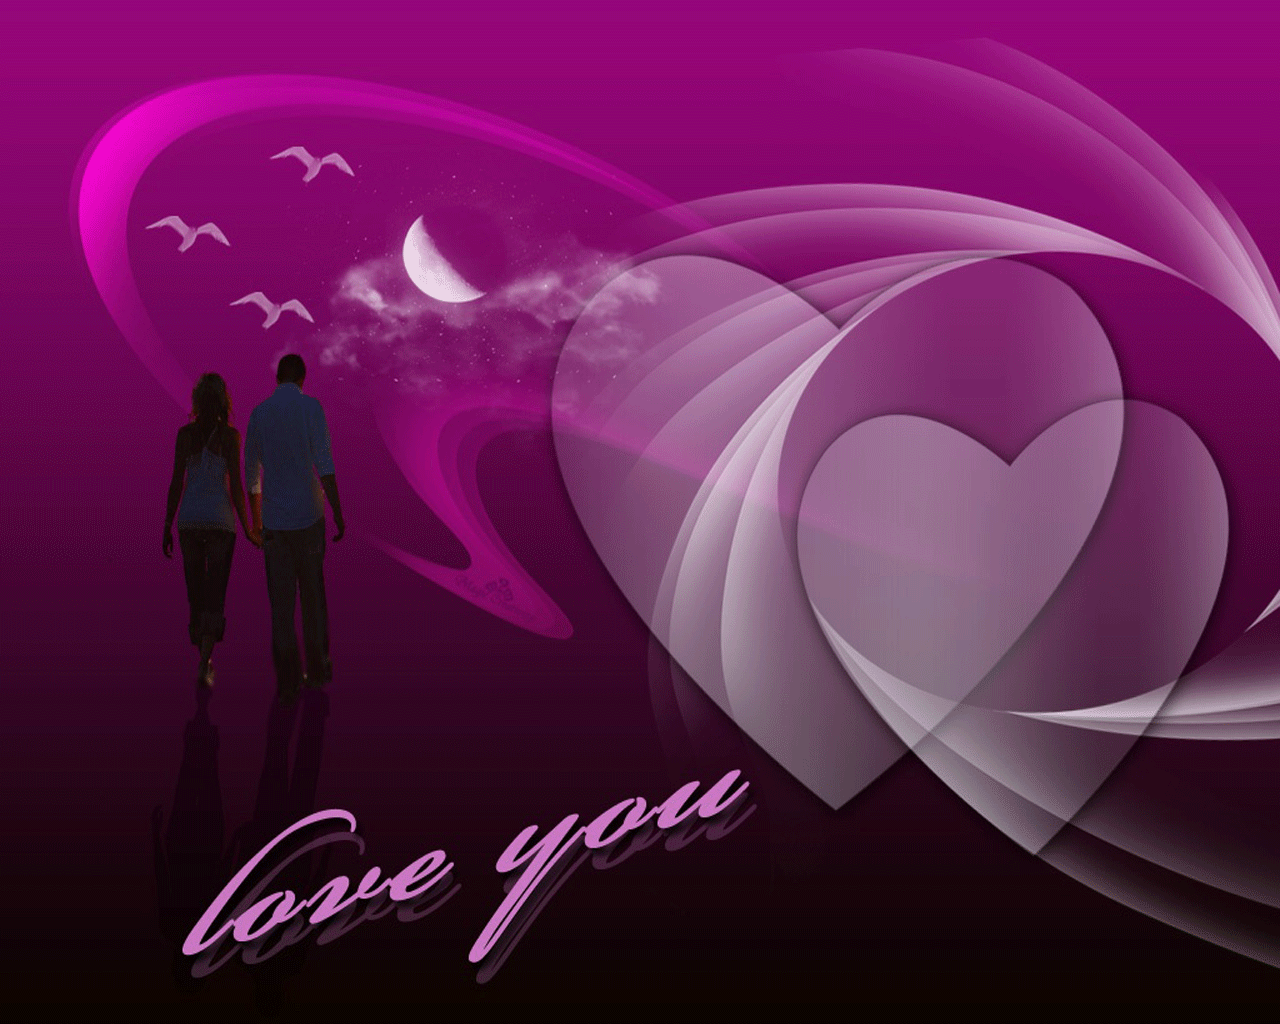 love wallpapers hd love wallpapers hd heart love wallpapers hd